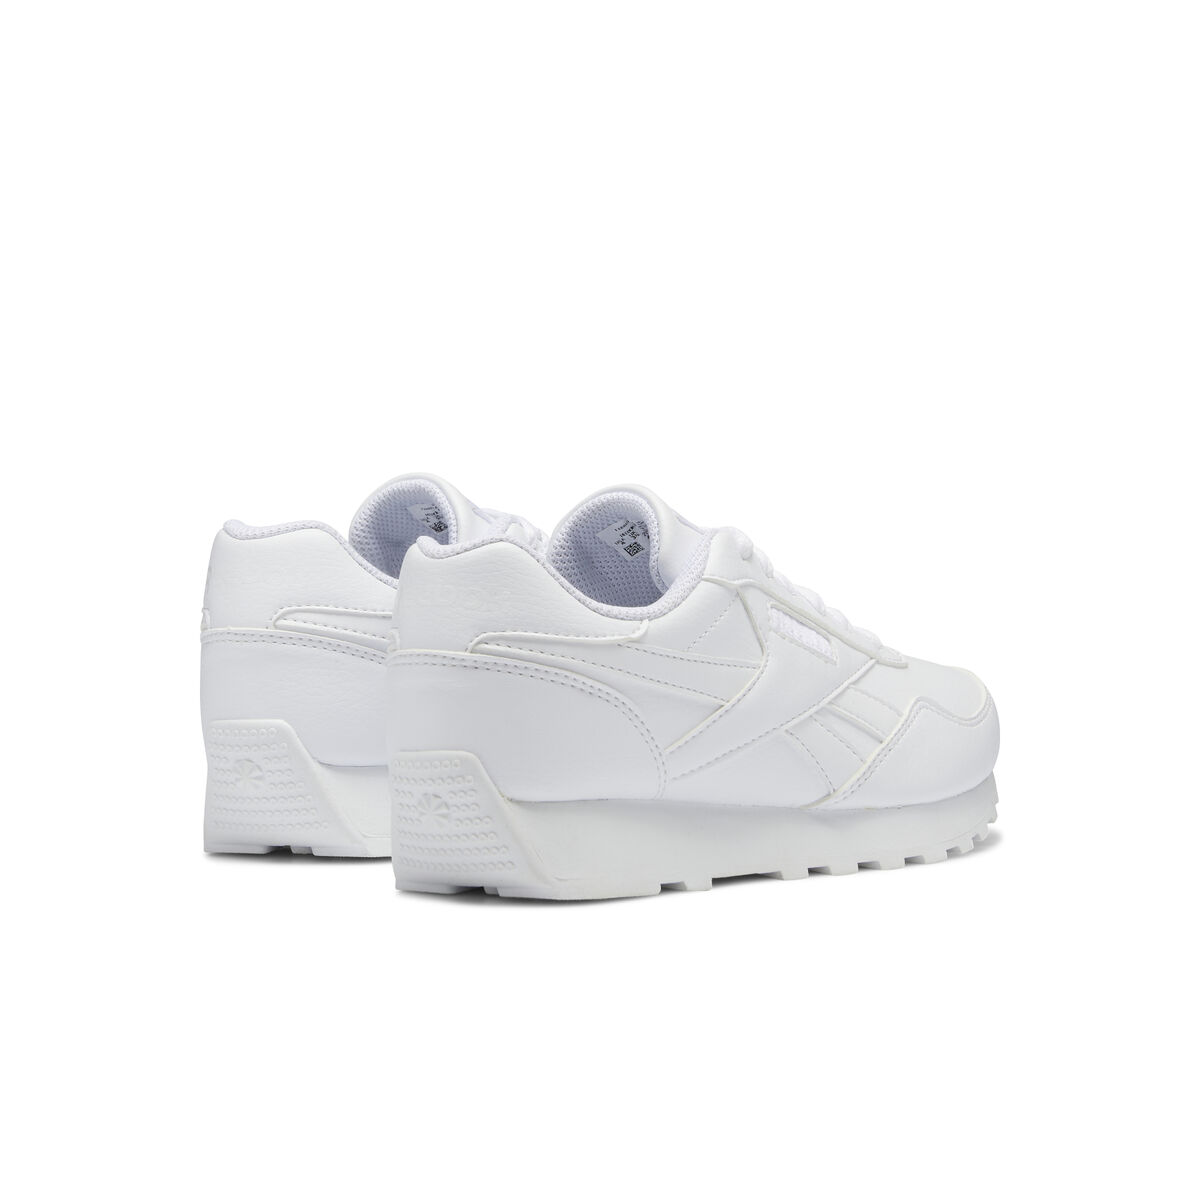 Sports Shoes for Kids Reebok ROYAL REWIND GY1724  White